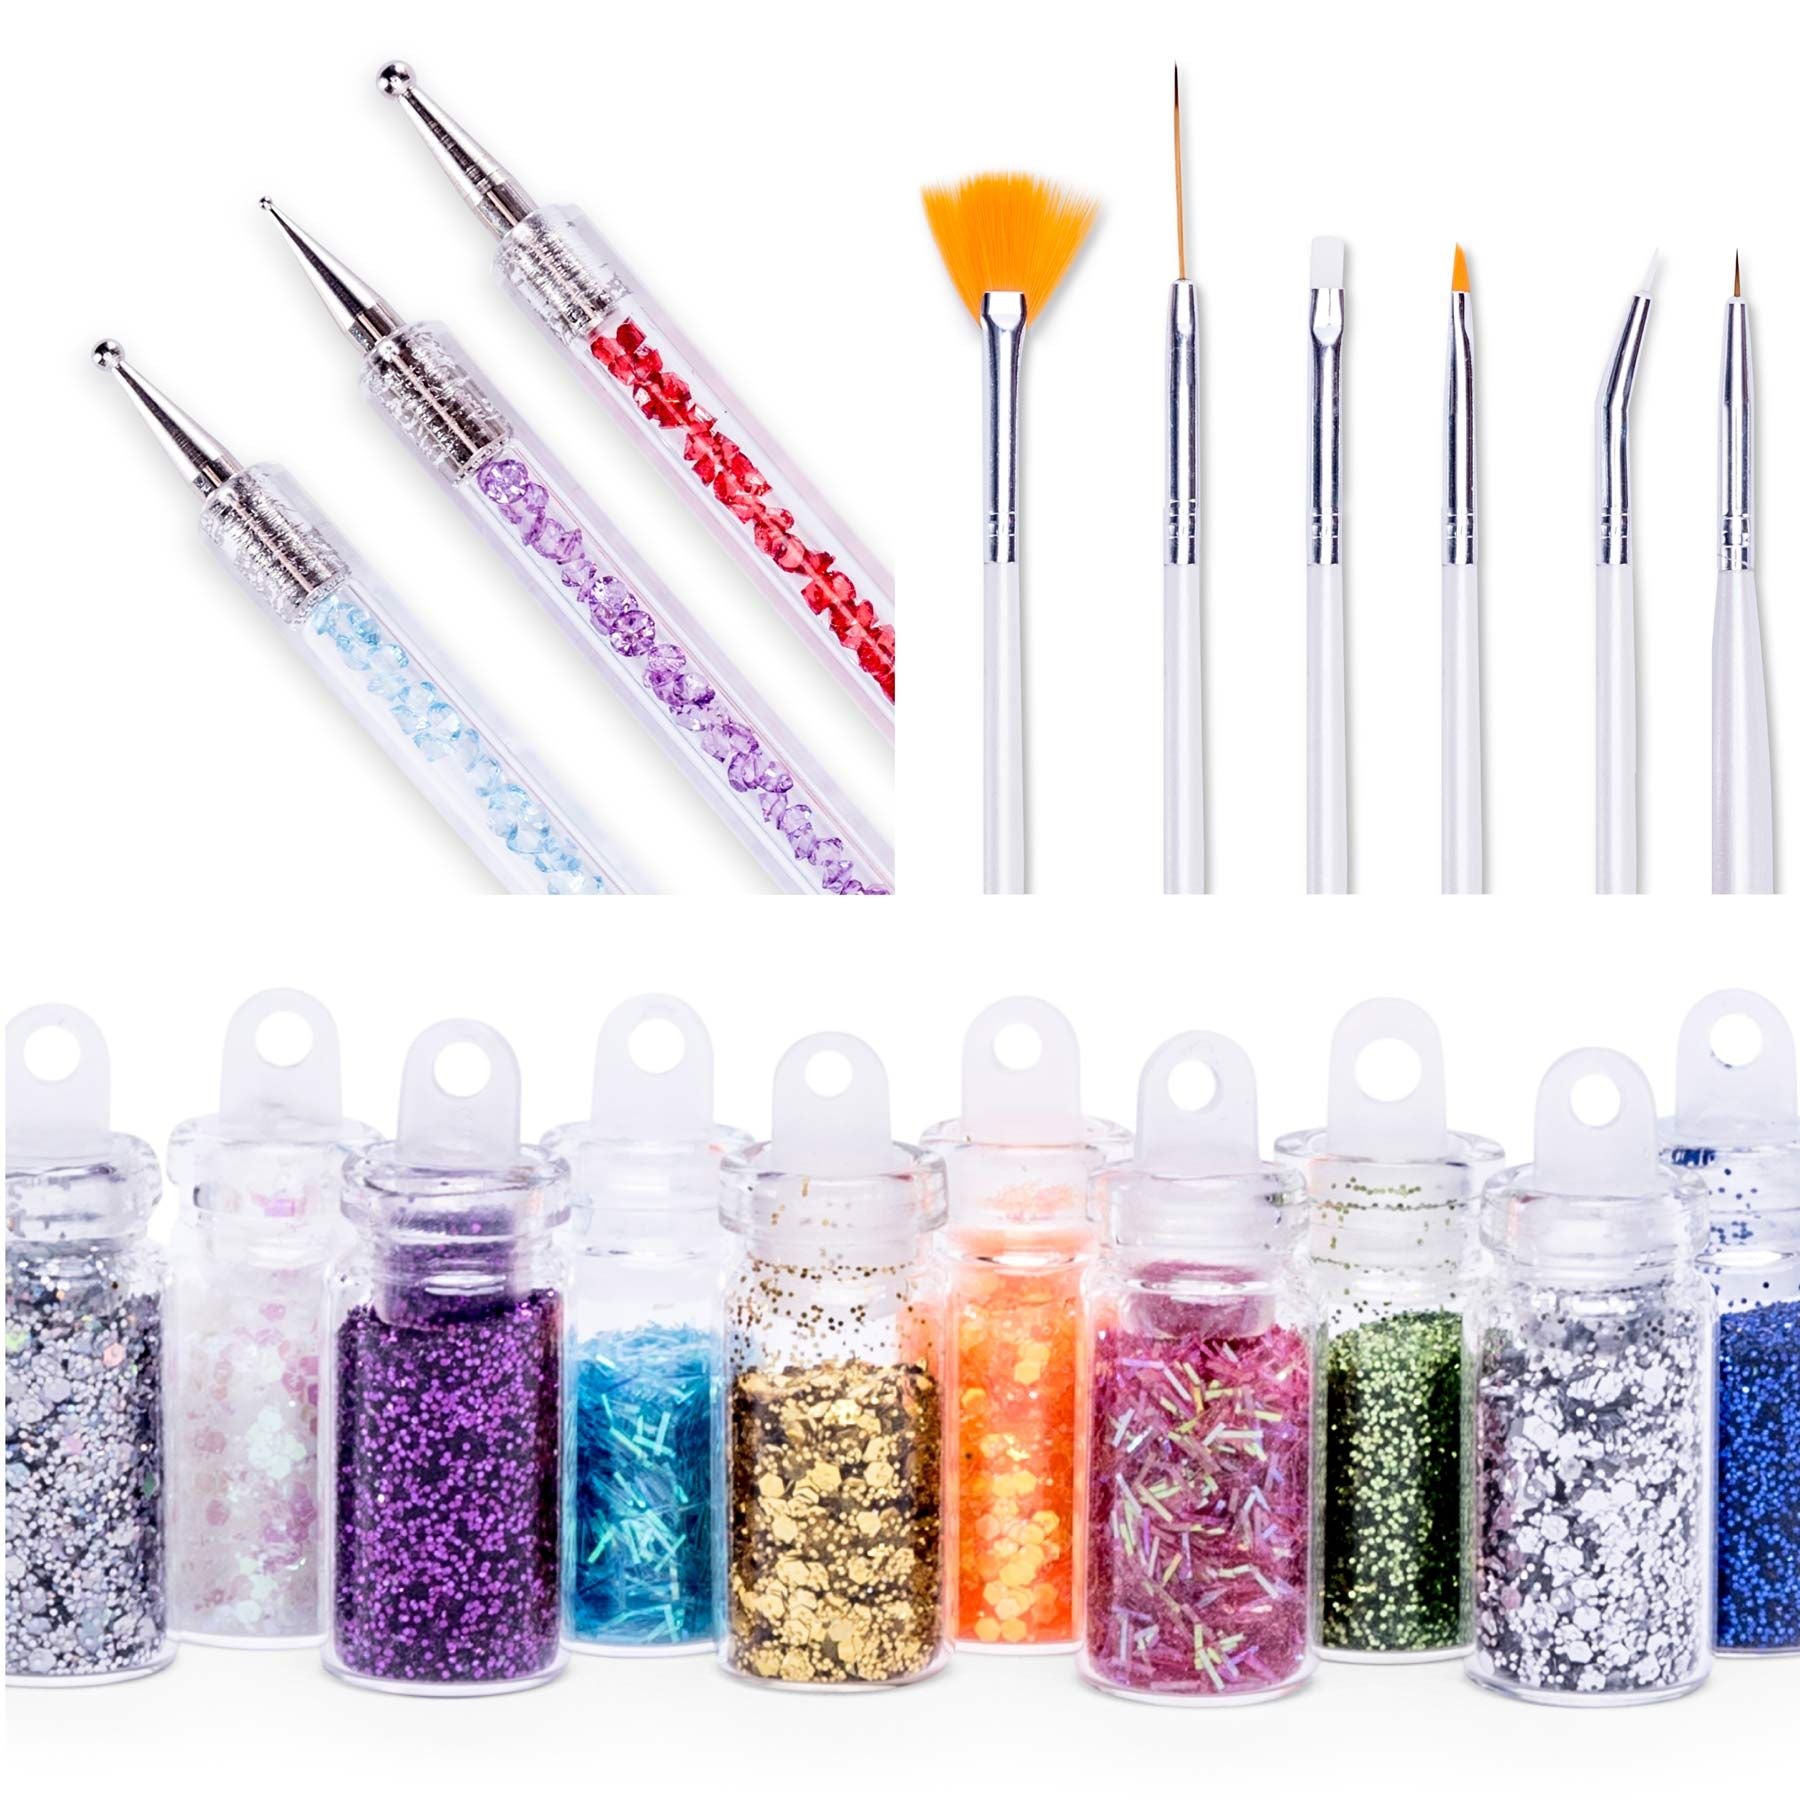 close up of double ended dotting tools, 6 nail brushes and glitter pots